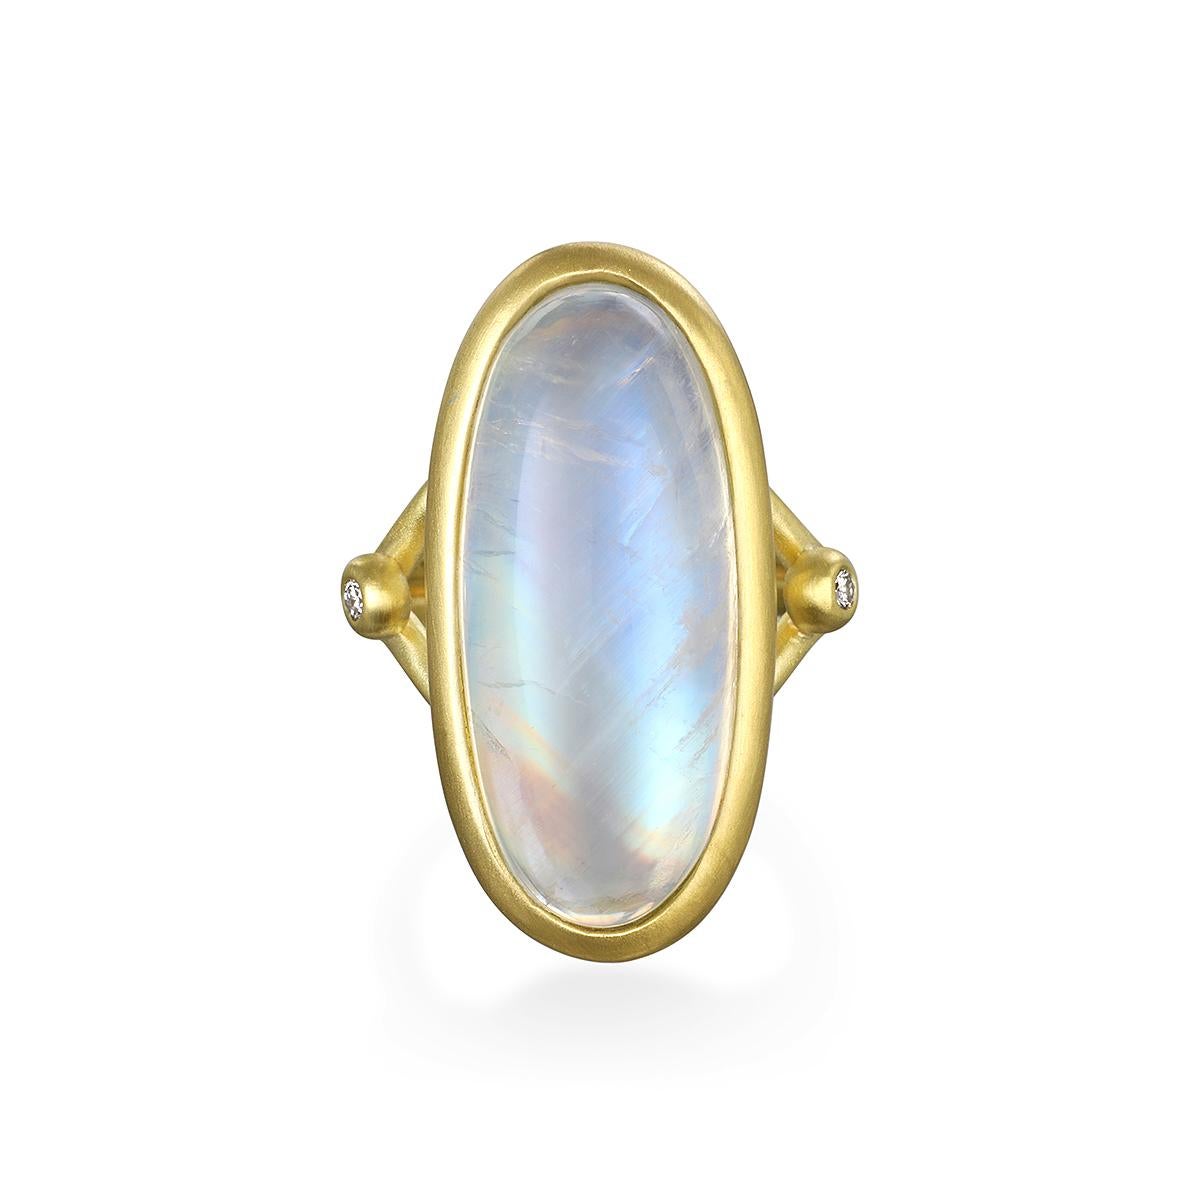 Considered to be a stone of inner growth and strength, this round rainbow moonstone with its two side diamonds has been set by designer Faye Kim in 18K gold* and reflects a bluish, milky light that has been compared to the light of the moon. The